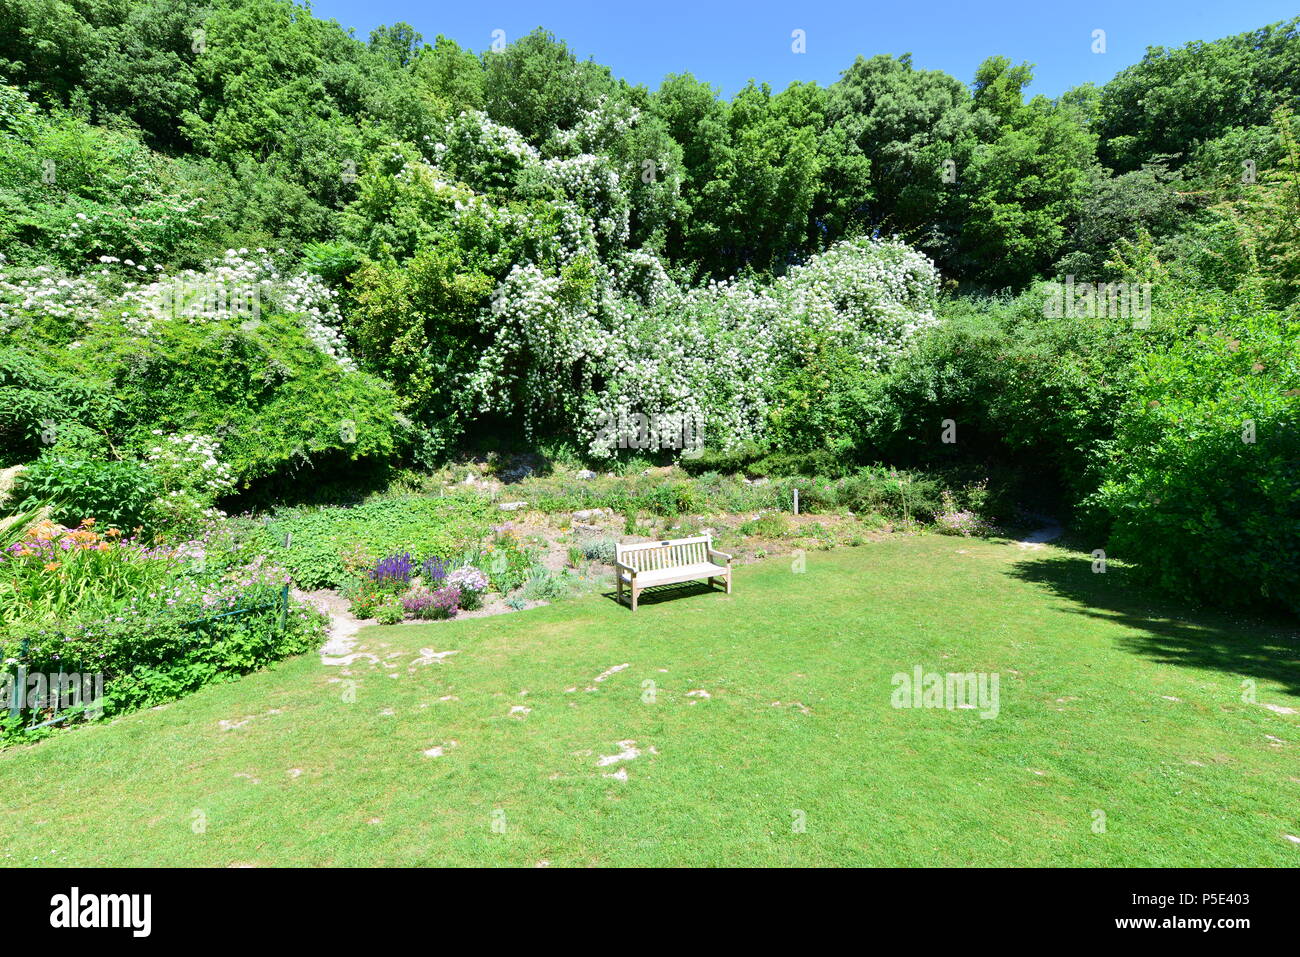 A rest area in an English country garden in summertime. Stock Photo